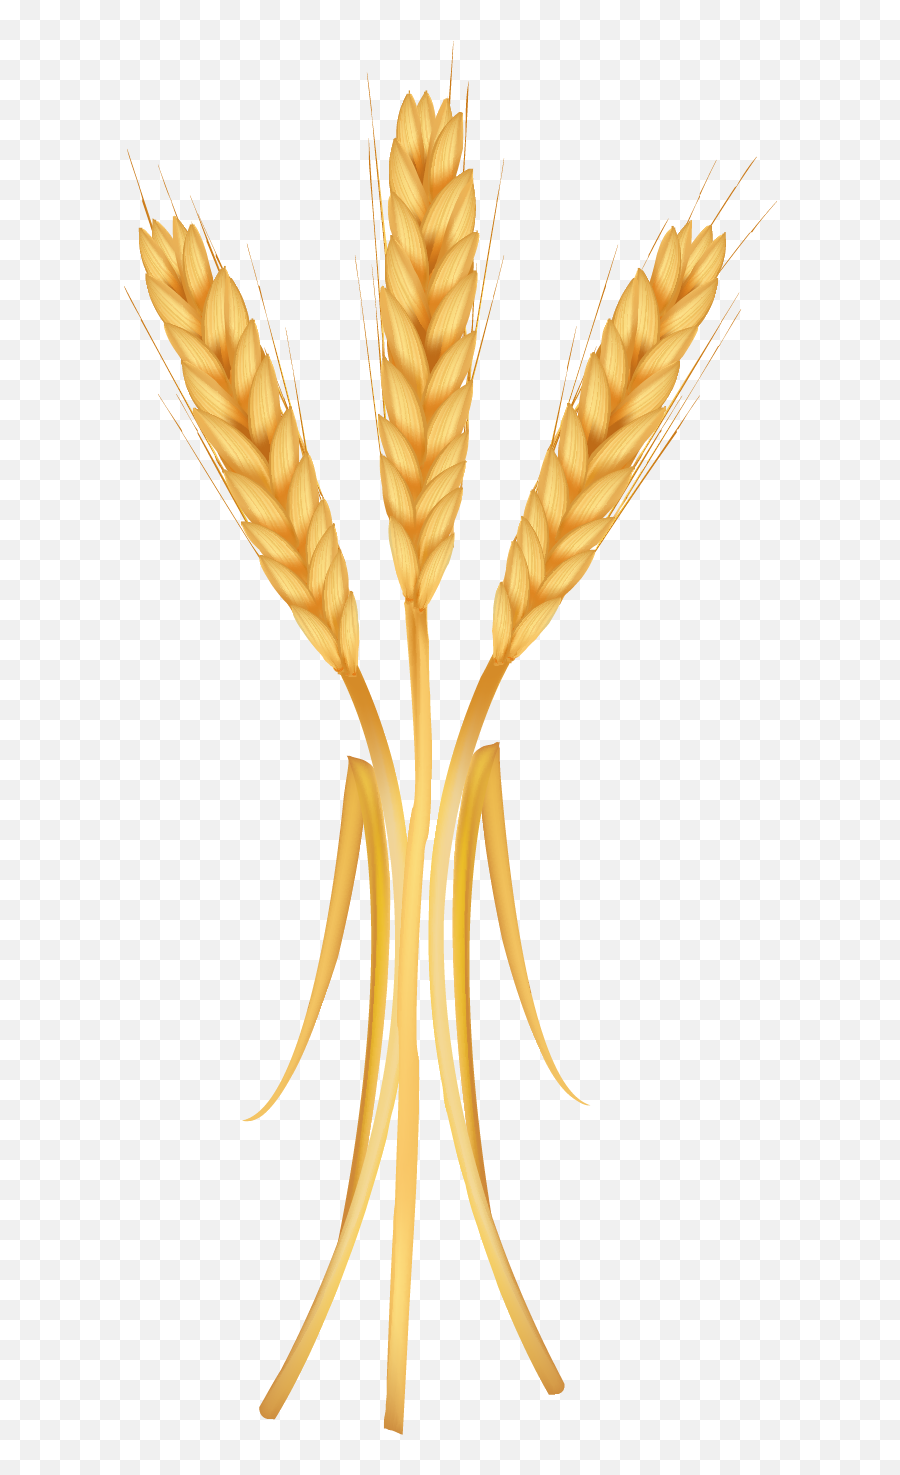 Free Png Wheat - Konfest,Wheat Transparent Background